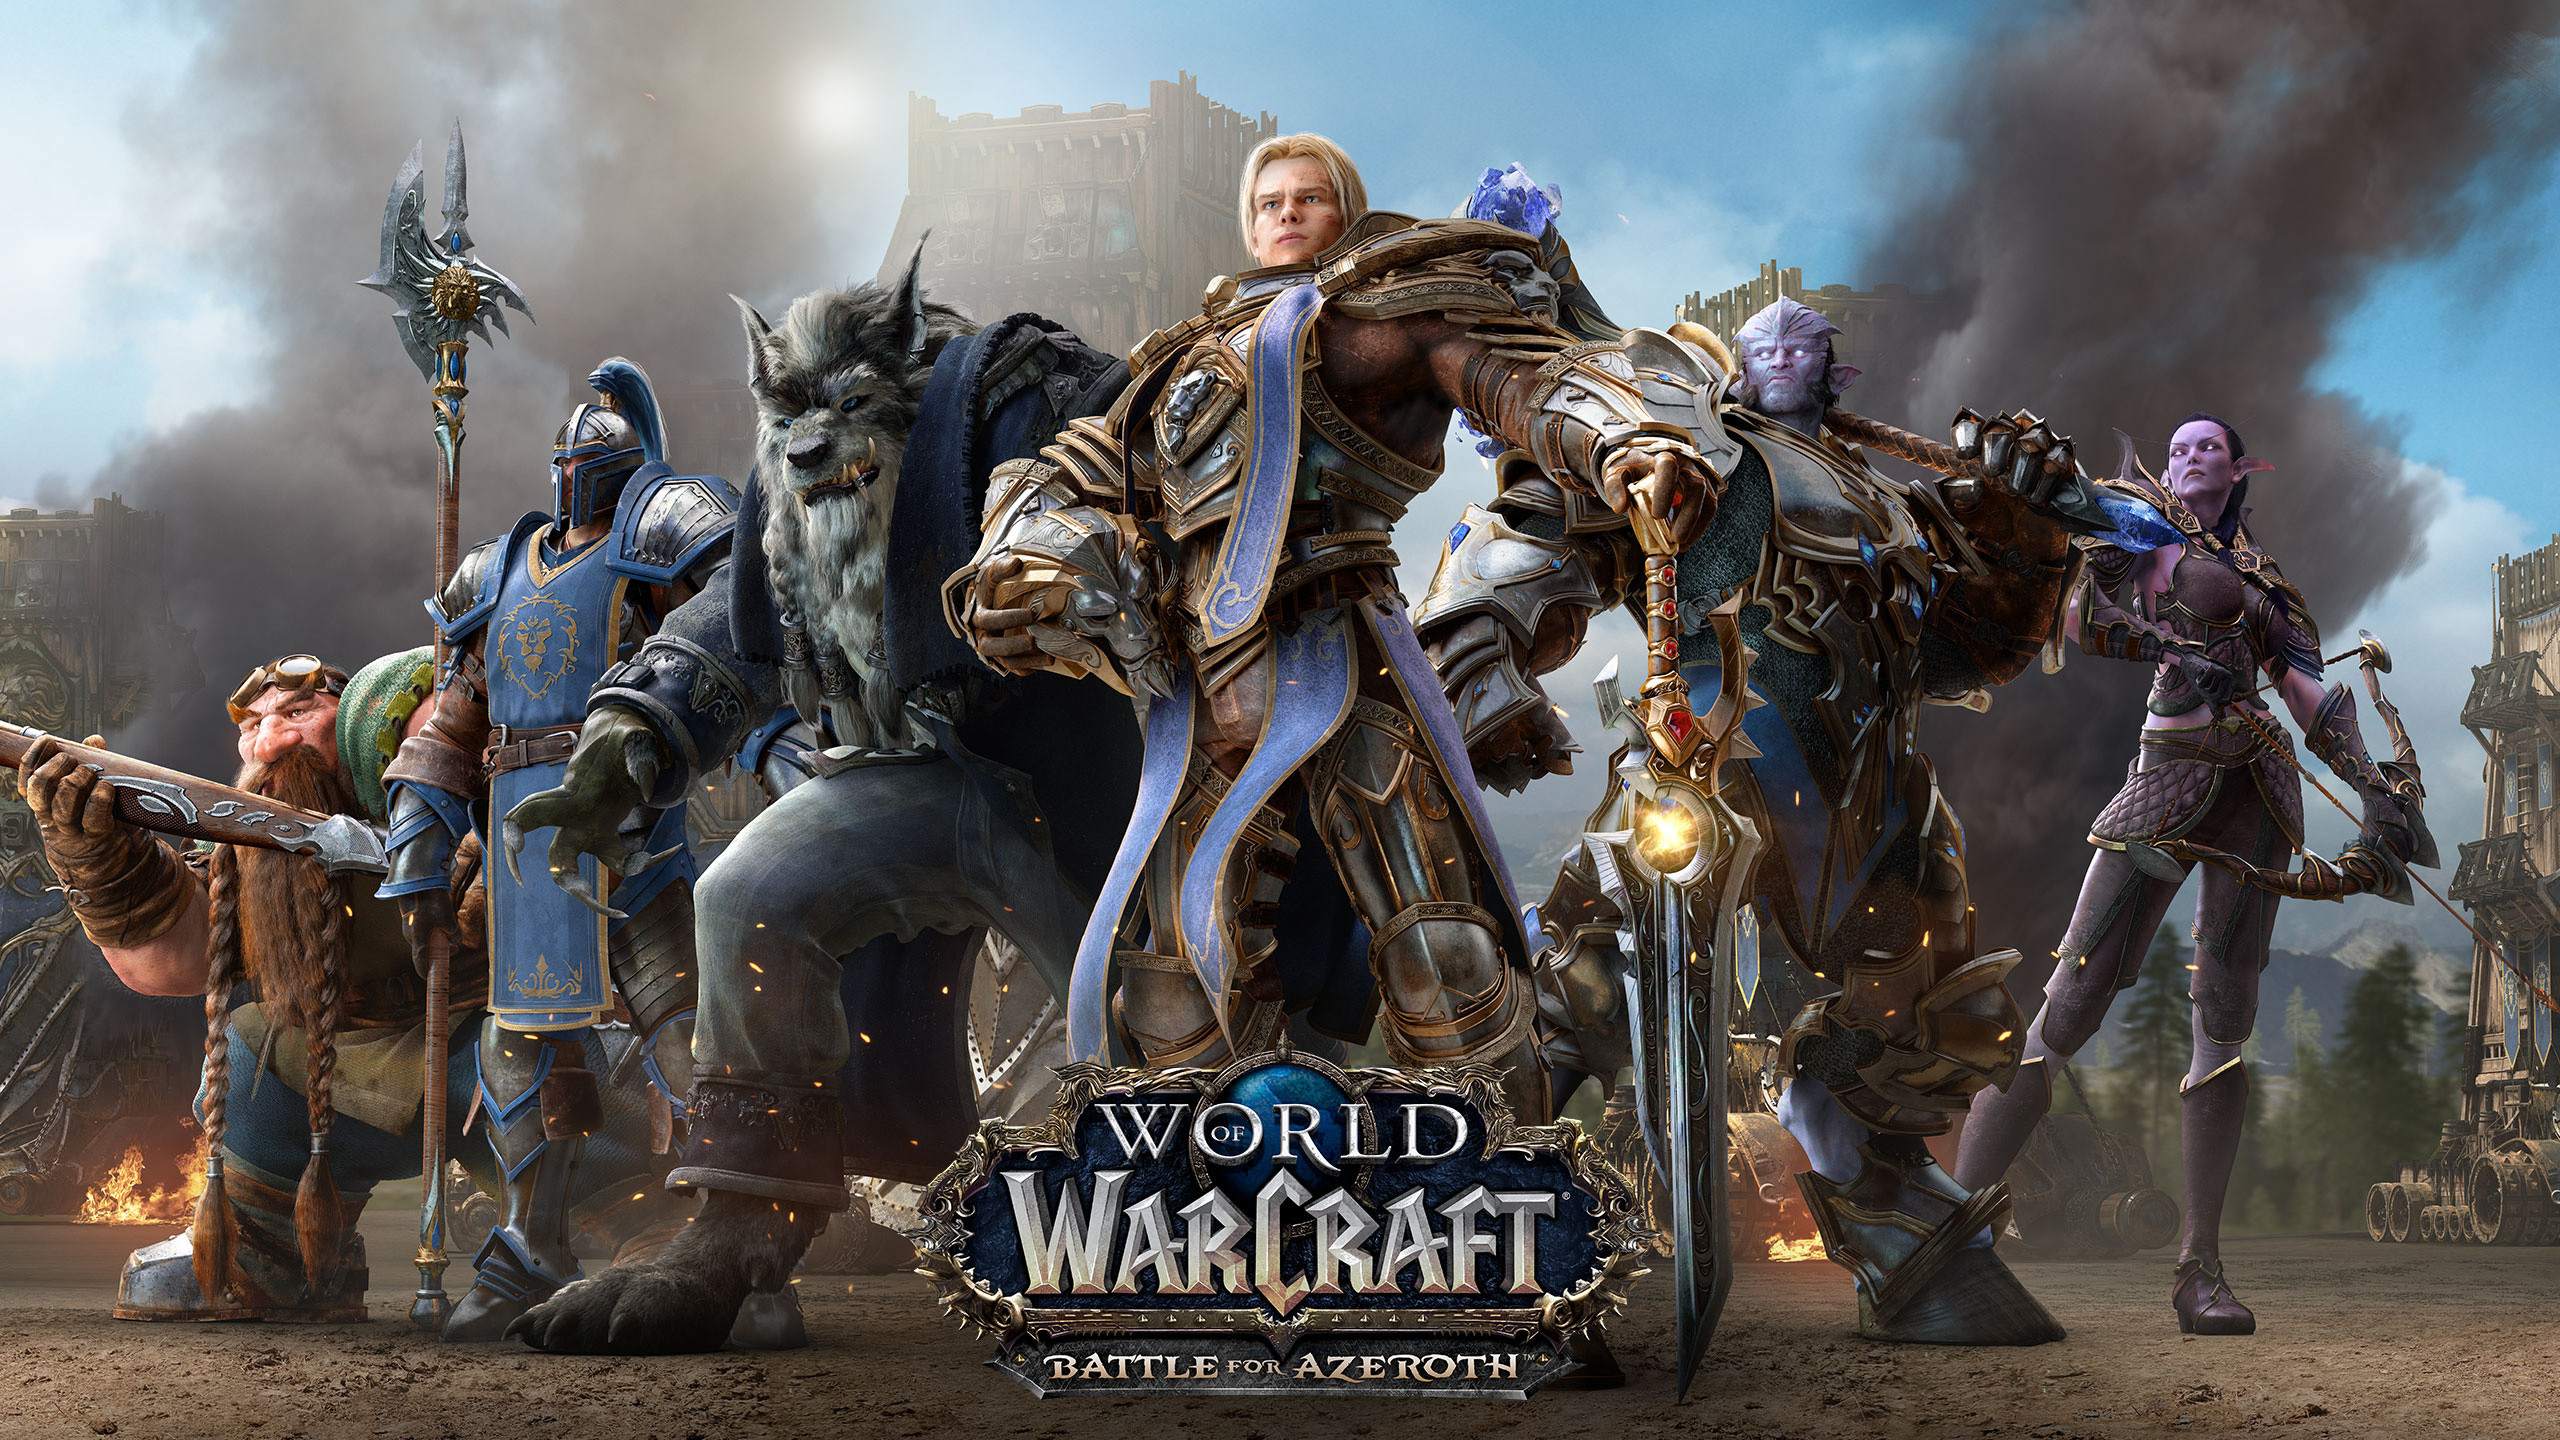 2560x1440 WoW Wallpaper Alliance Heroes Battle for Azeroth